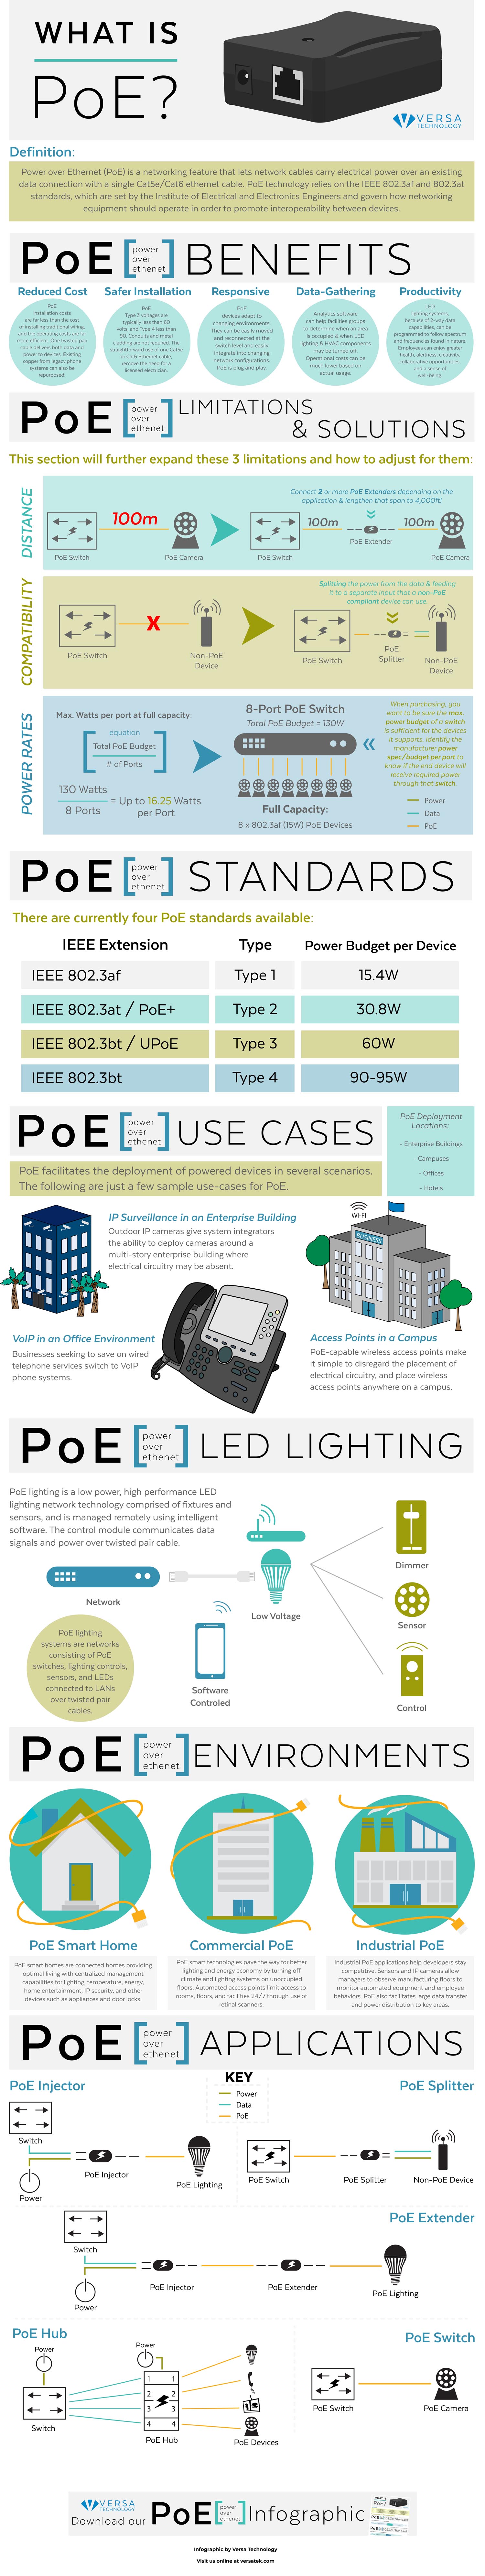 What is PoE? Everything you need to know about Power Over Ethernet